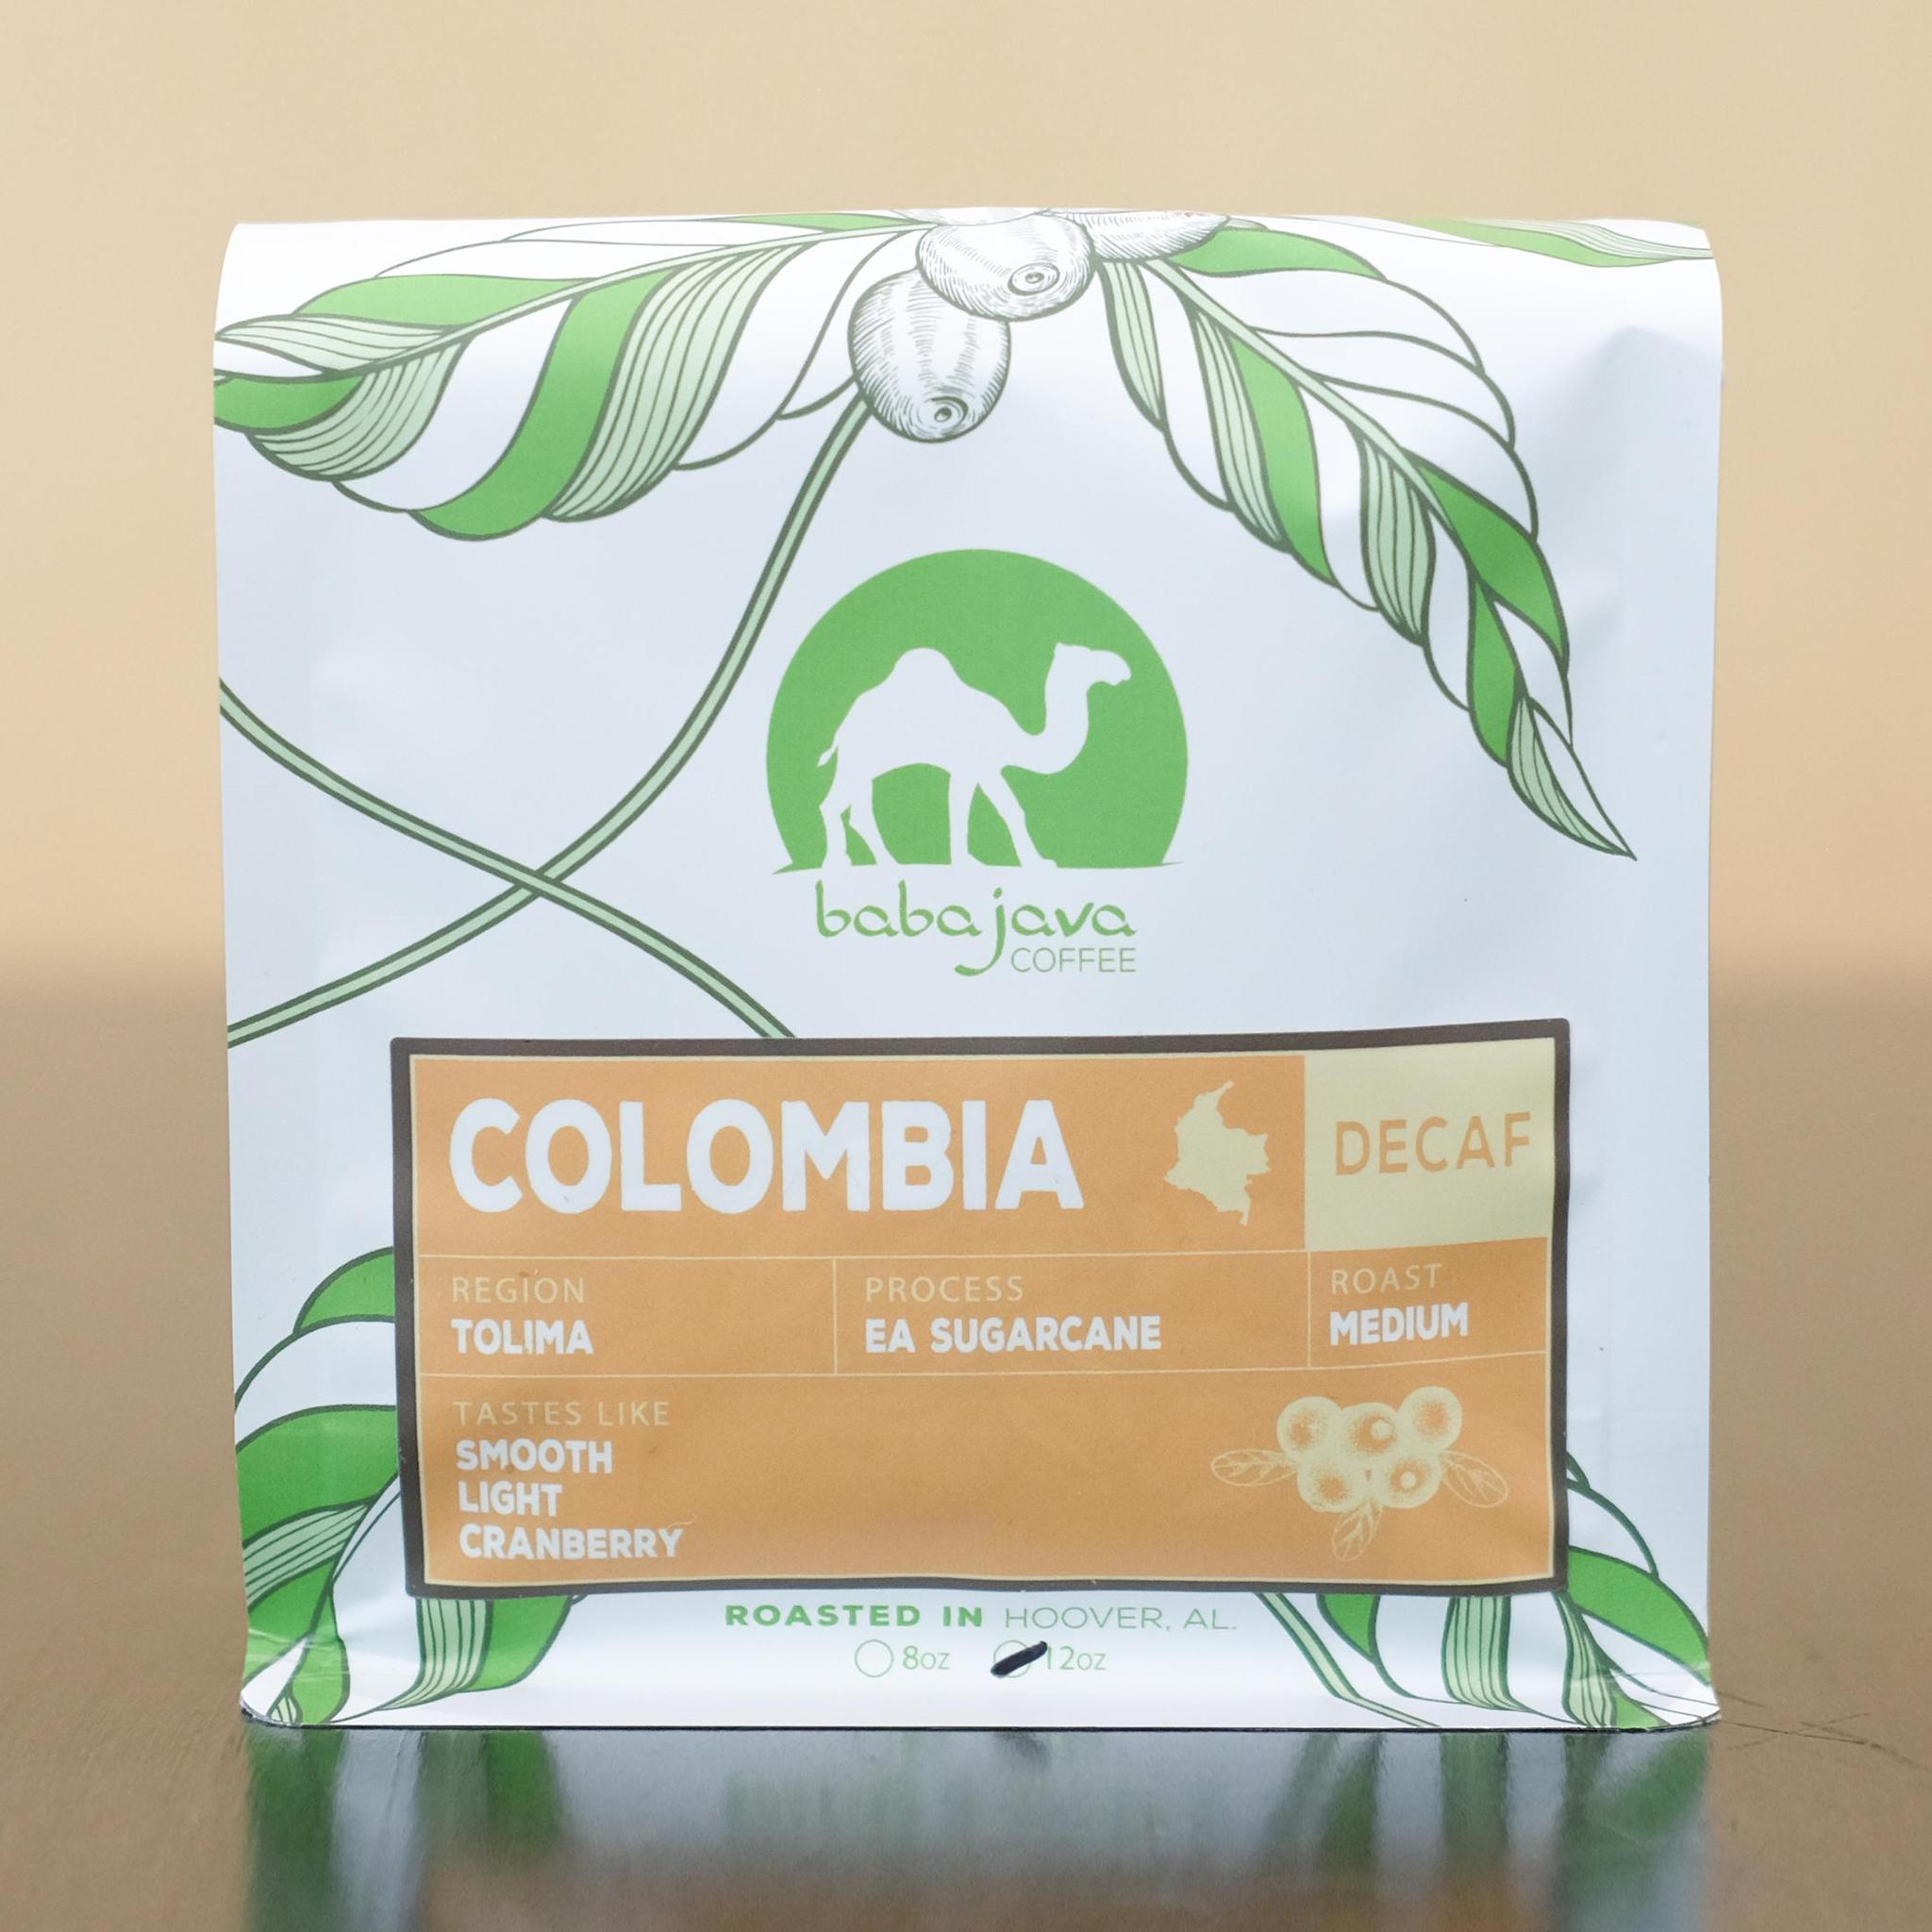 A bag of coffee with an orange label that reads Colombia. The bag has a drawing of a coffee plant and the Baba Java Coffee logo.